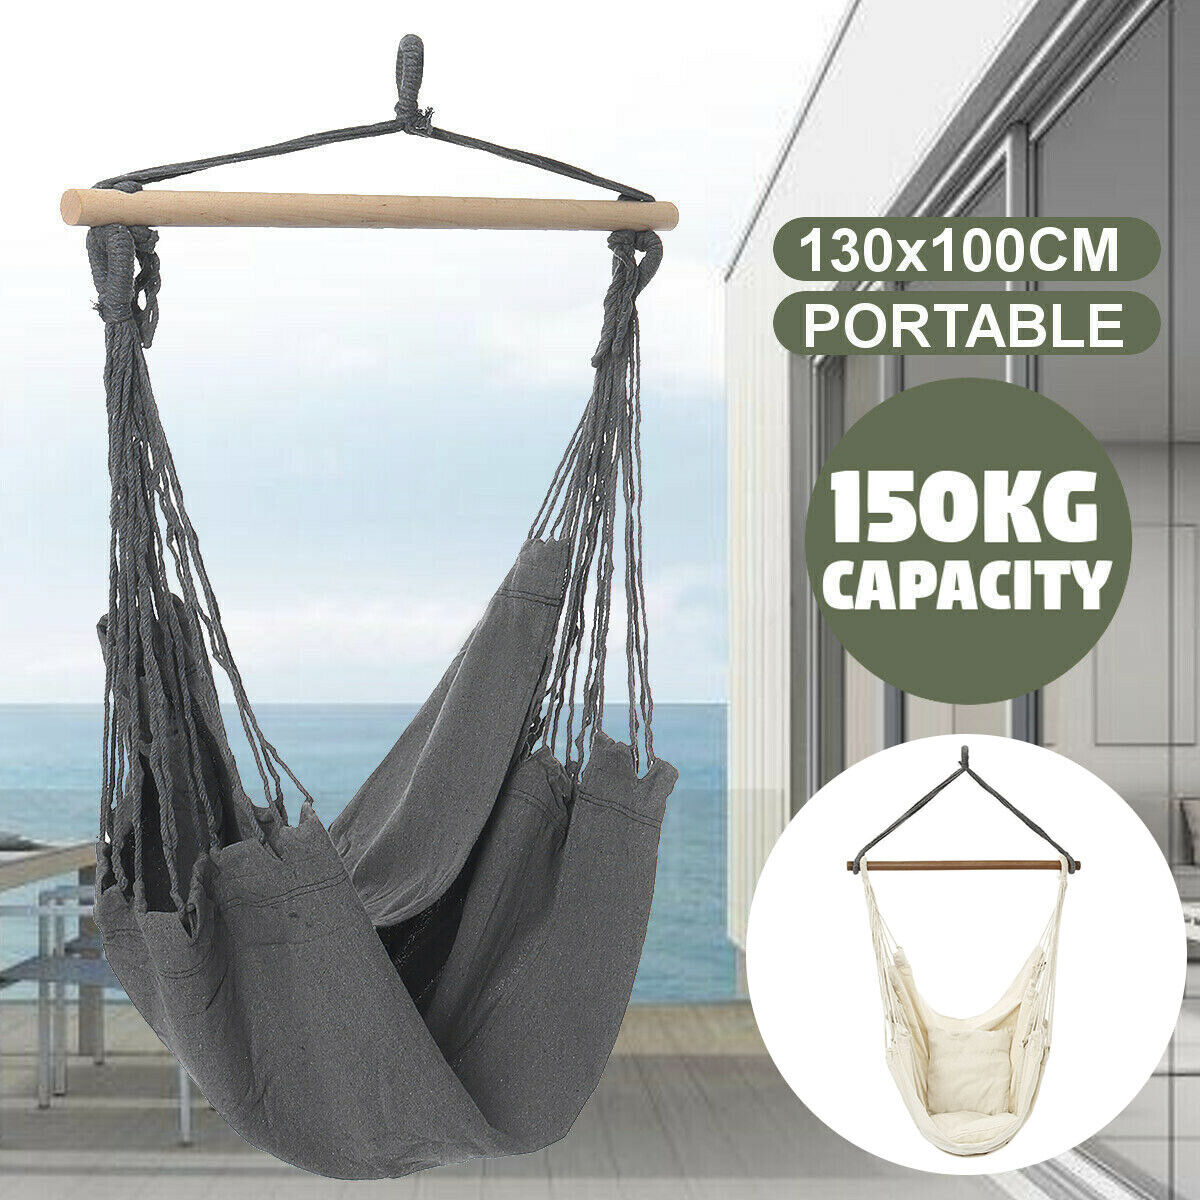 Portable Hanging Hammock Chair Swing Garden Outdoor Camping Soft Cushions New